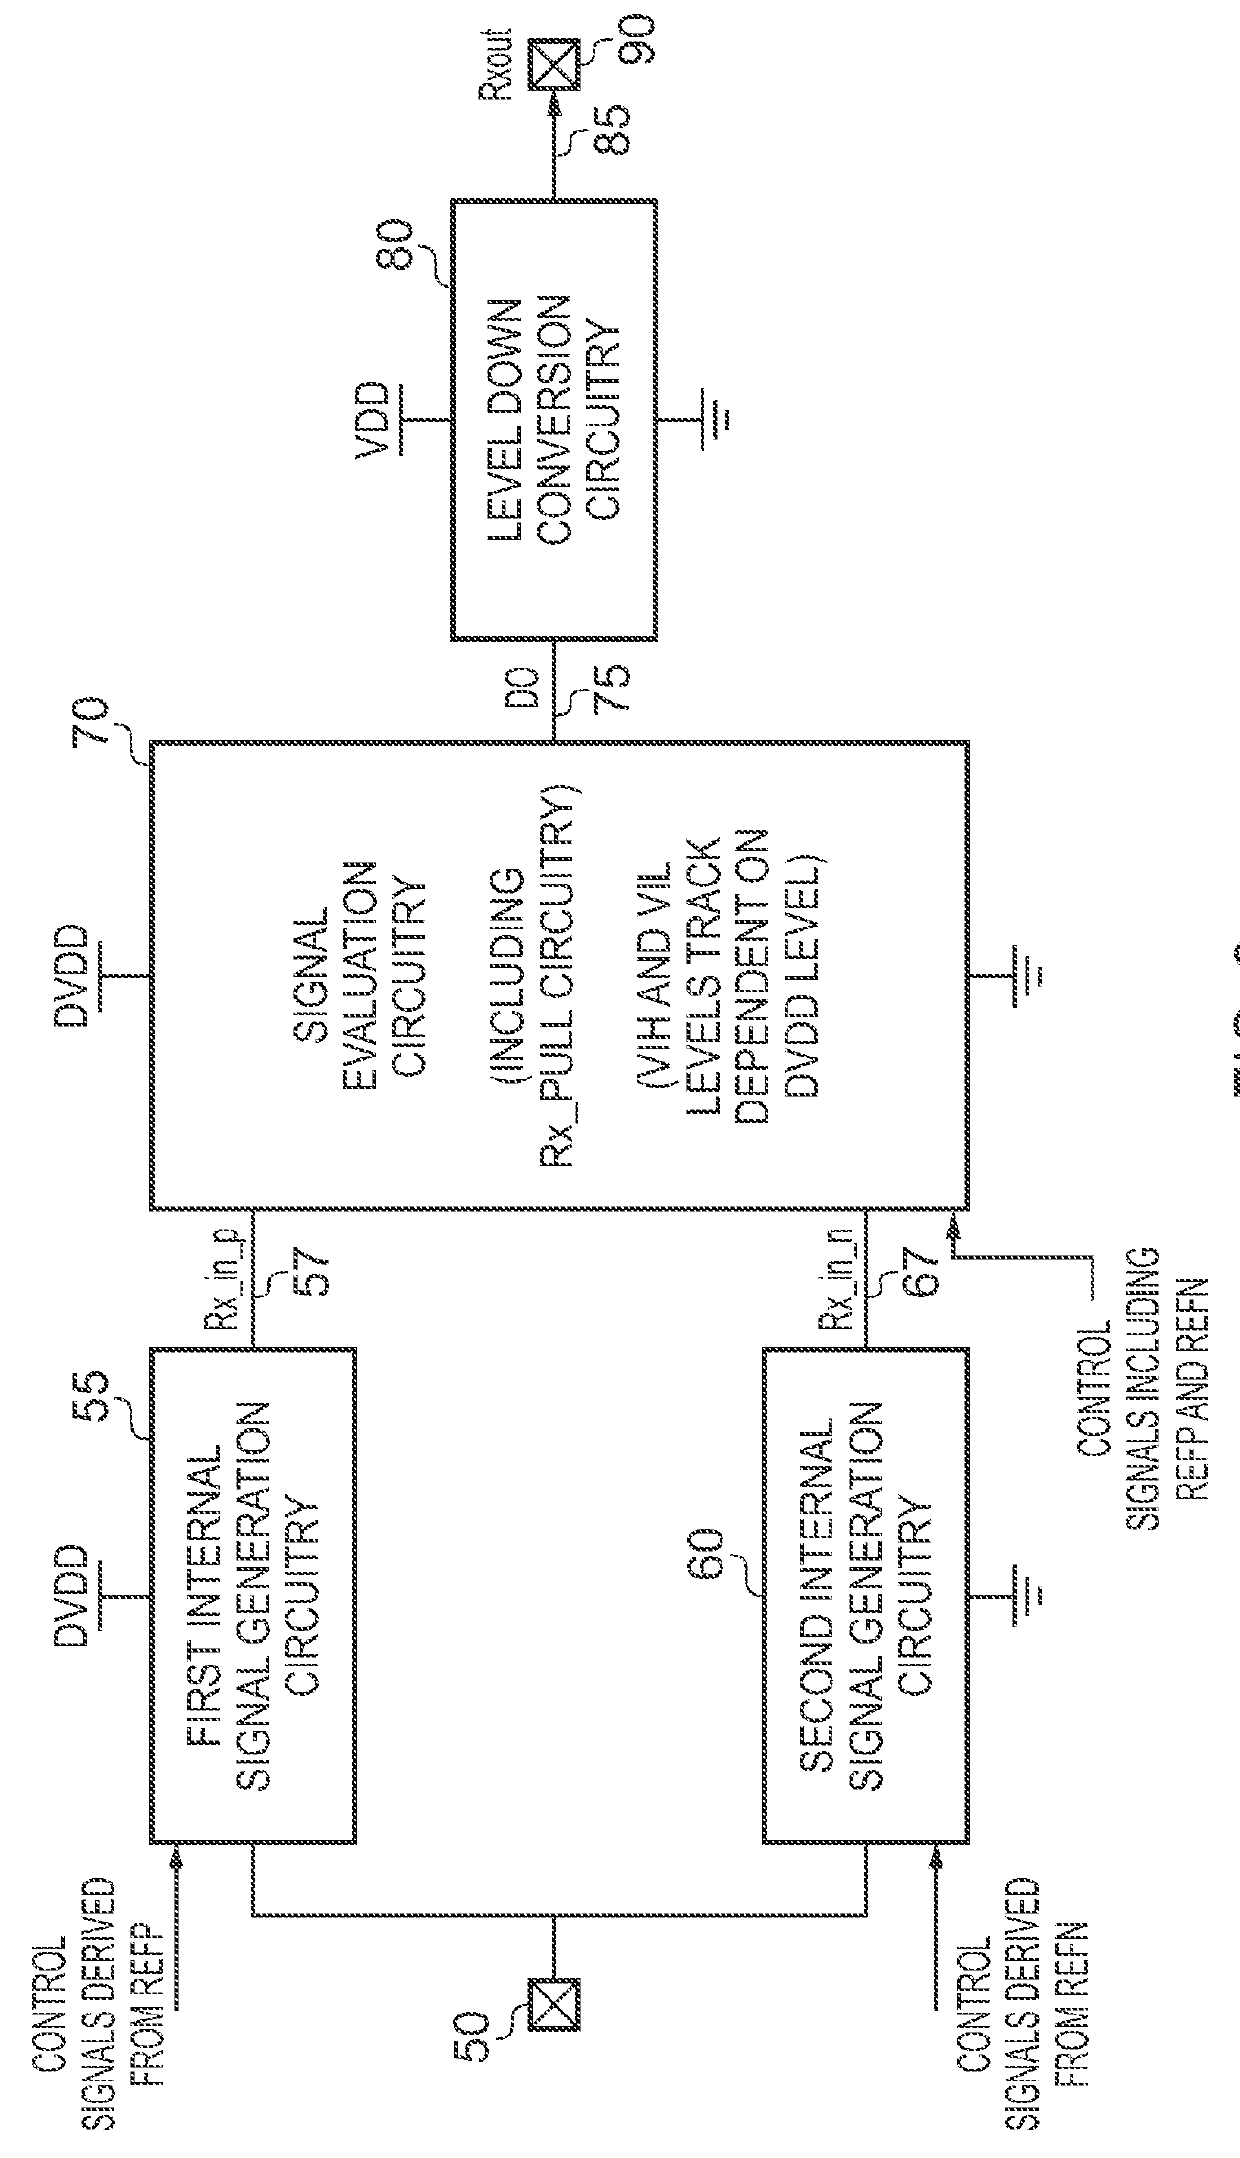 Receiver Circuitry and Method for Converting an Input Signal From a Source Voltage Domain Into an Output Signal for a Destination Voltage Domain